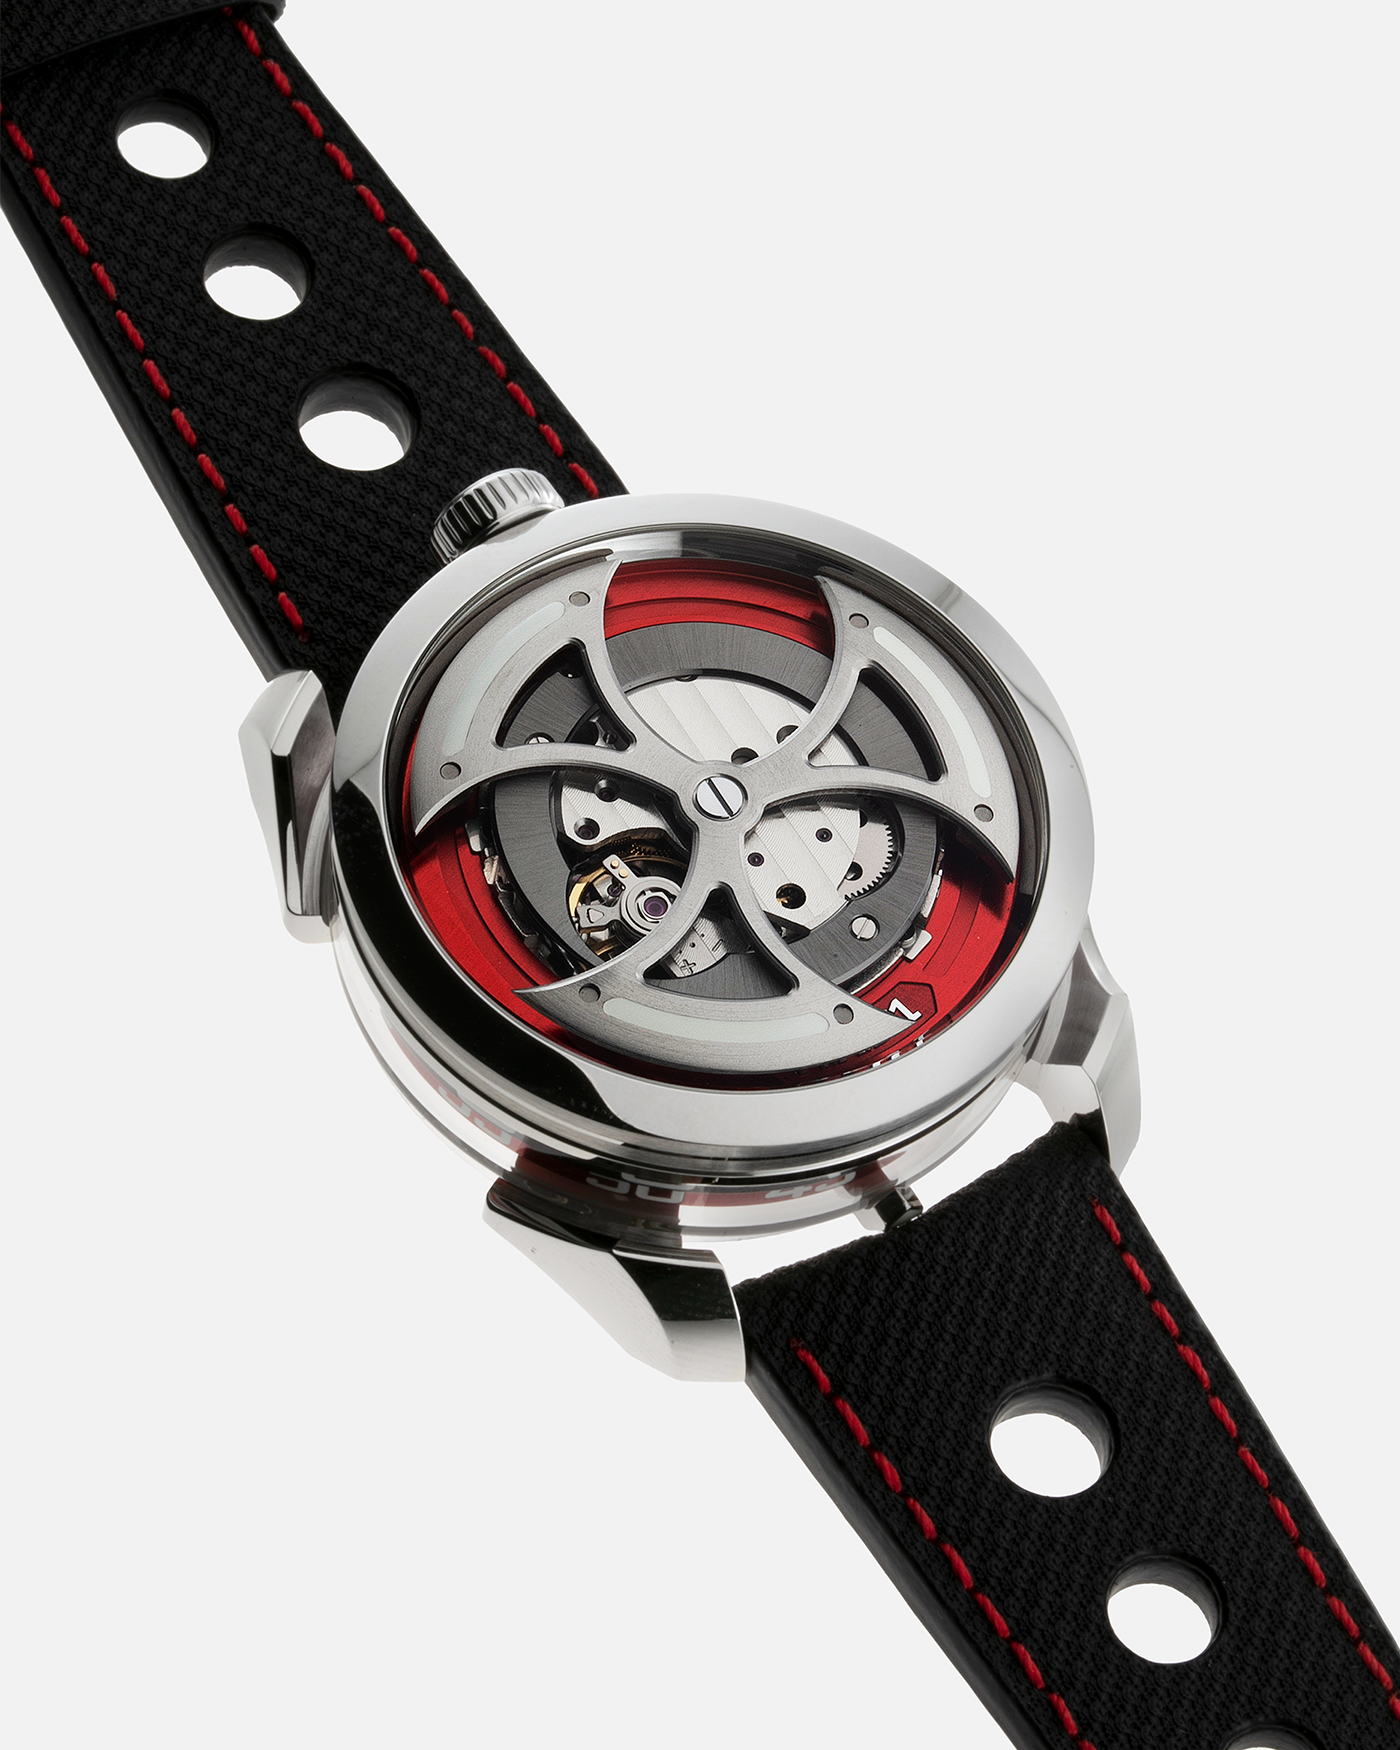 Brand: MB&F Year: 2022 Model: MAD 1 Material: Stainless Steel and Titanium Movement: Miyota Cal 821A Case Diameter: 42mm Bracelet/Strap: MB&F Black Calfskin Leather with Red Stitching and Stainless Steel Deployant Buckle